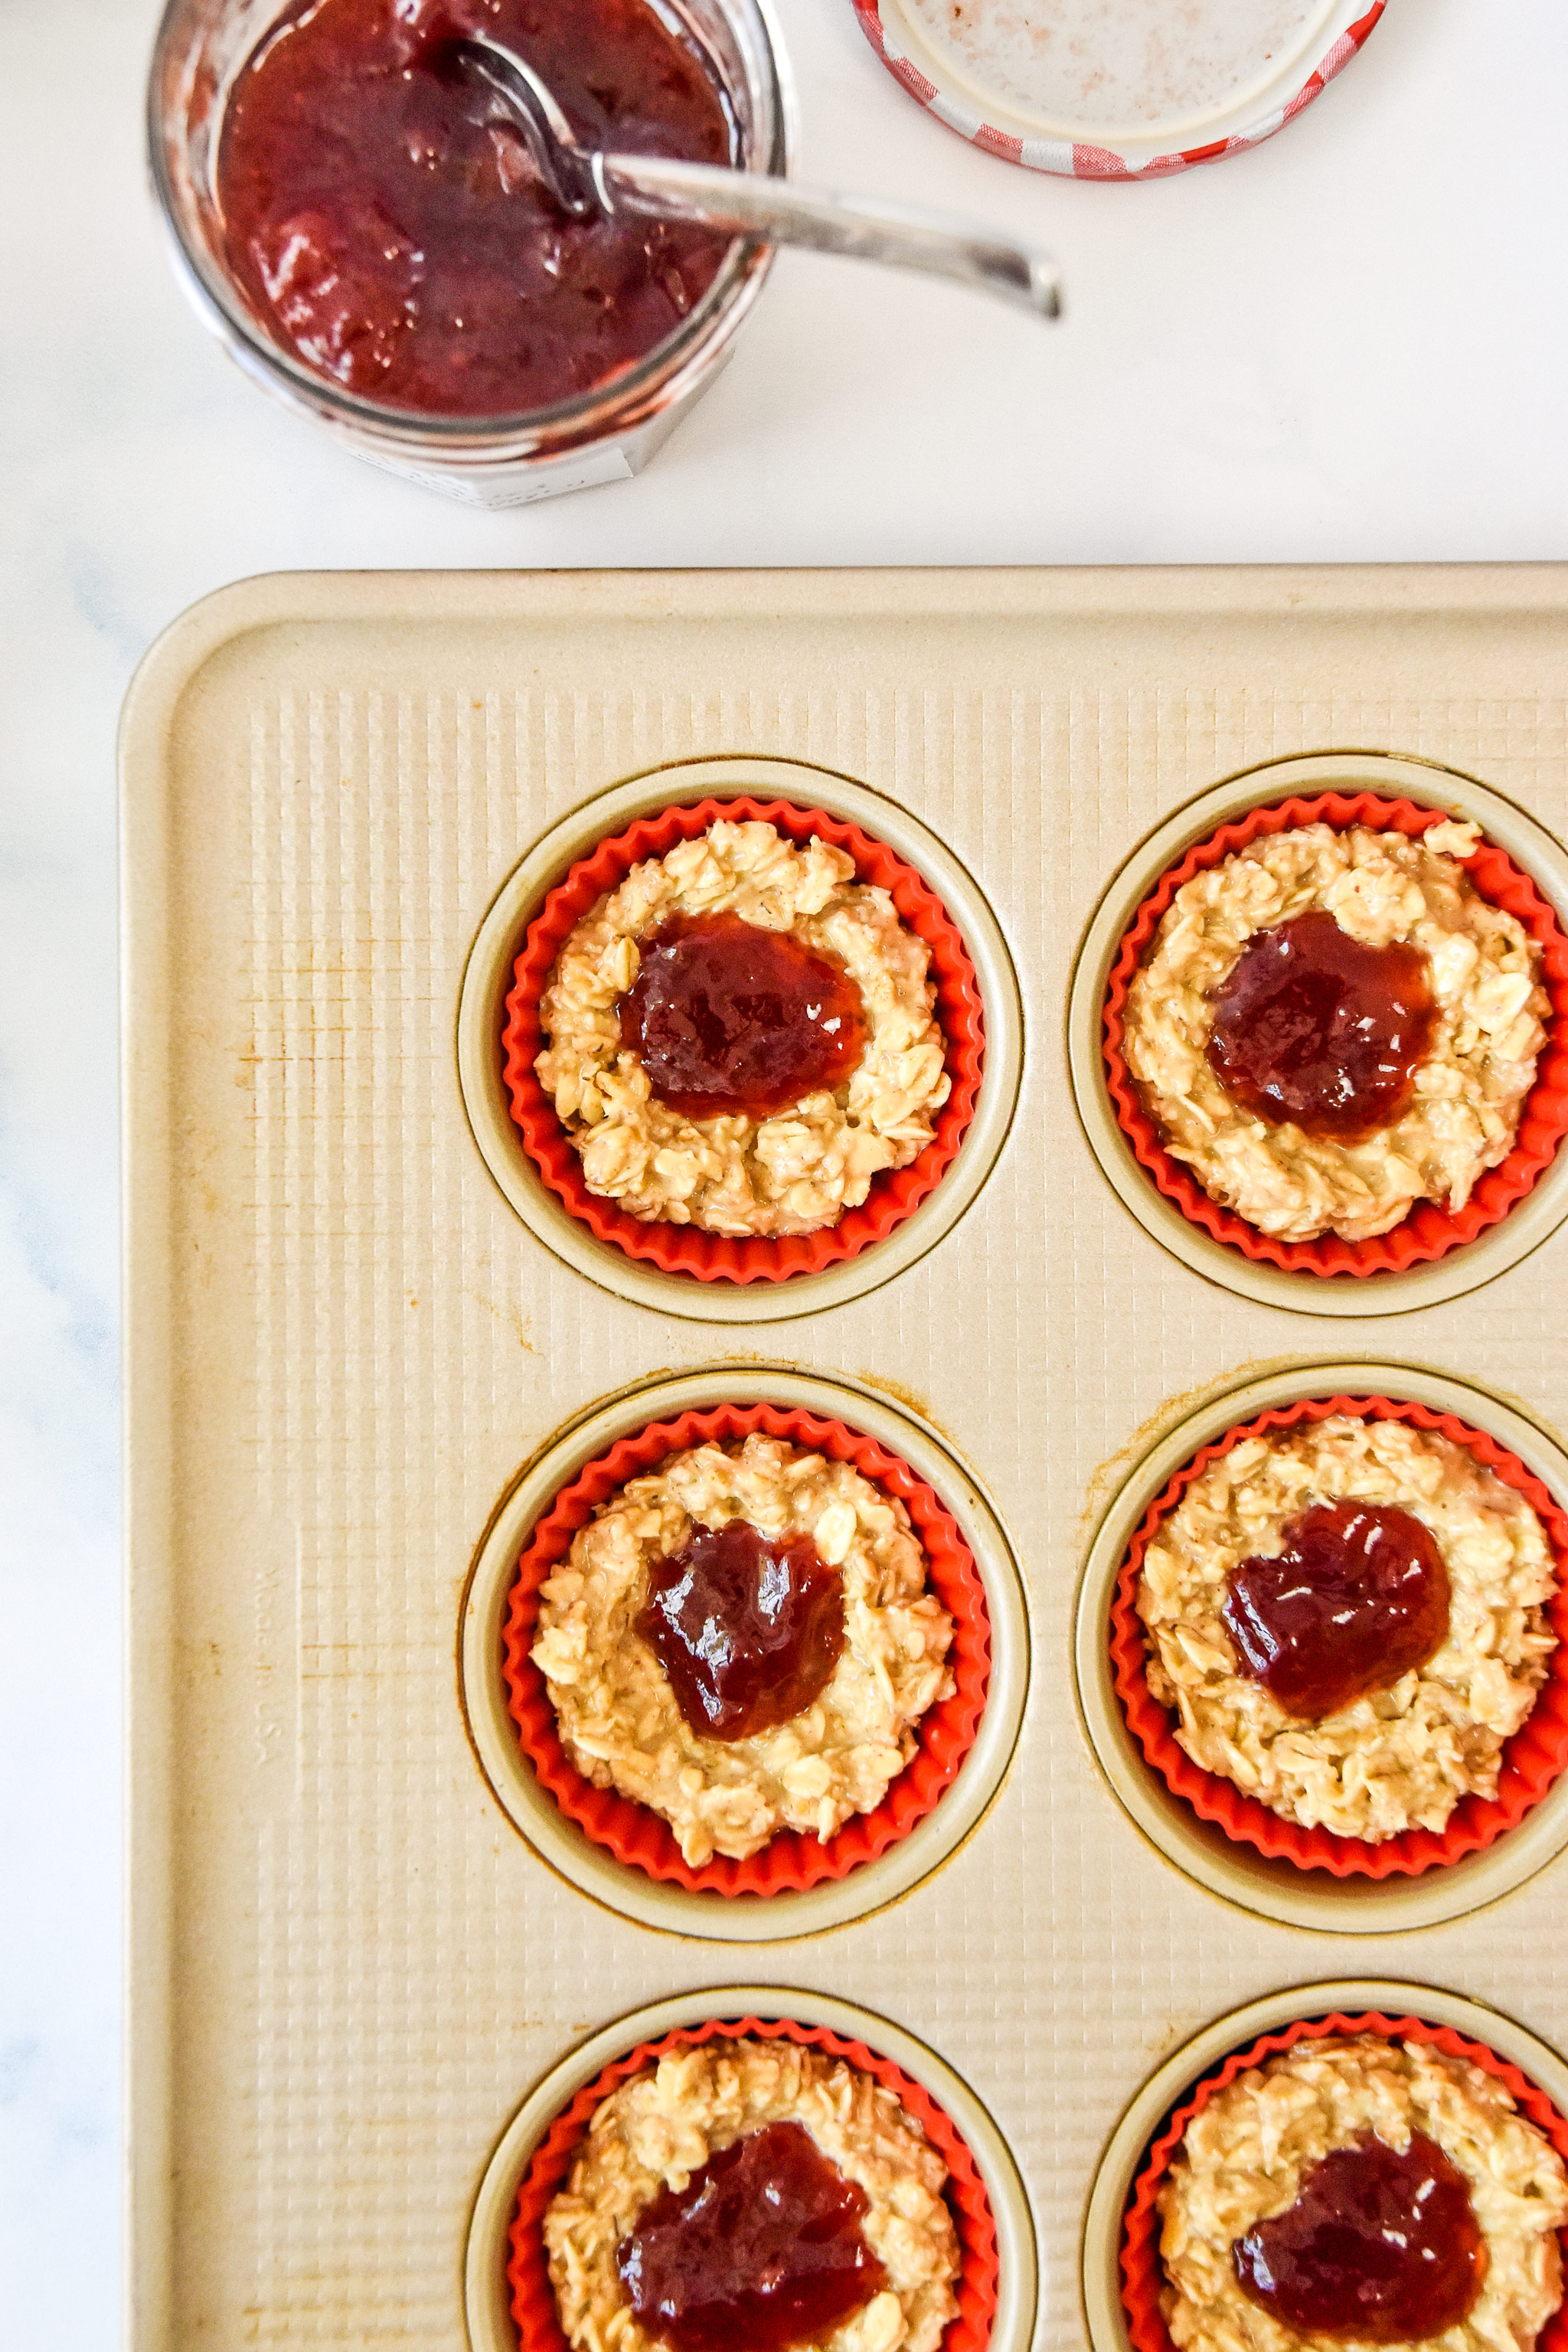 jelly in the center of each oatmeal cup in the muffin tin.